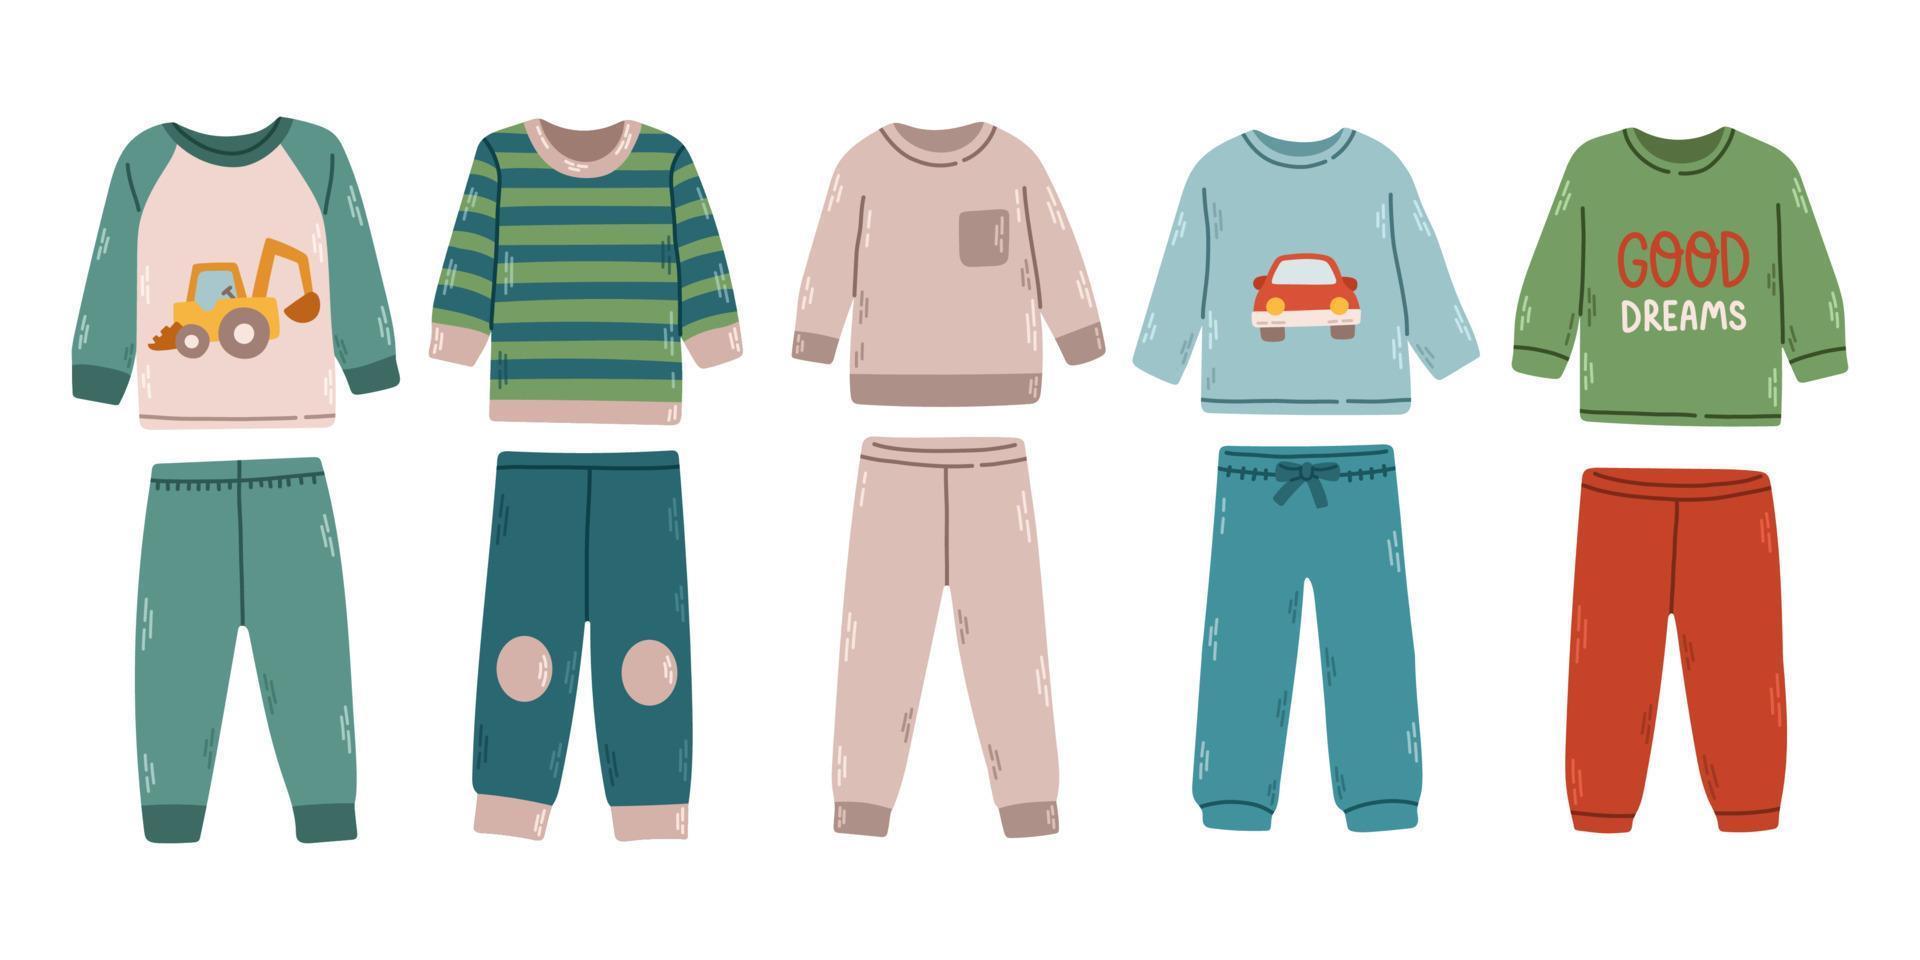 Boys pajamas set. Textile night clothes for kids sleepwear bedtime pajamas vector colored pictures. Vector illustration